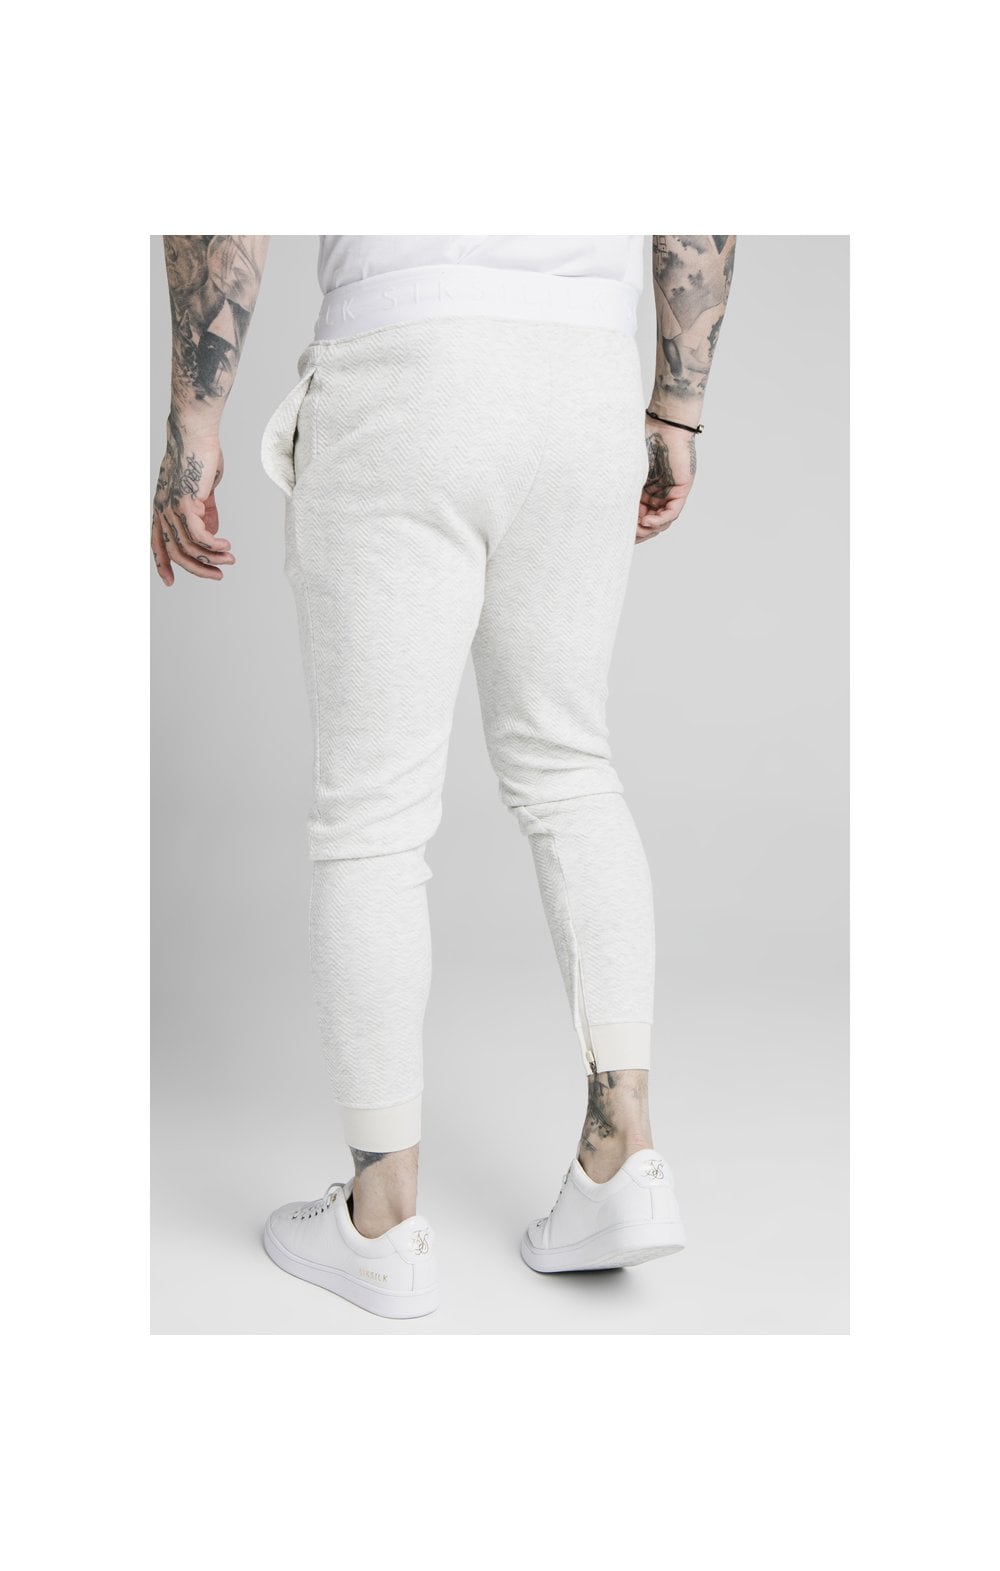 Load image into Gallery viewer, SikSilk Agility Textured Tape Track Pants - Snow Marl (5)